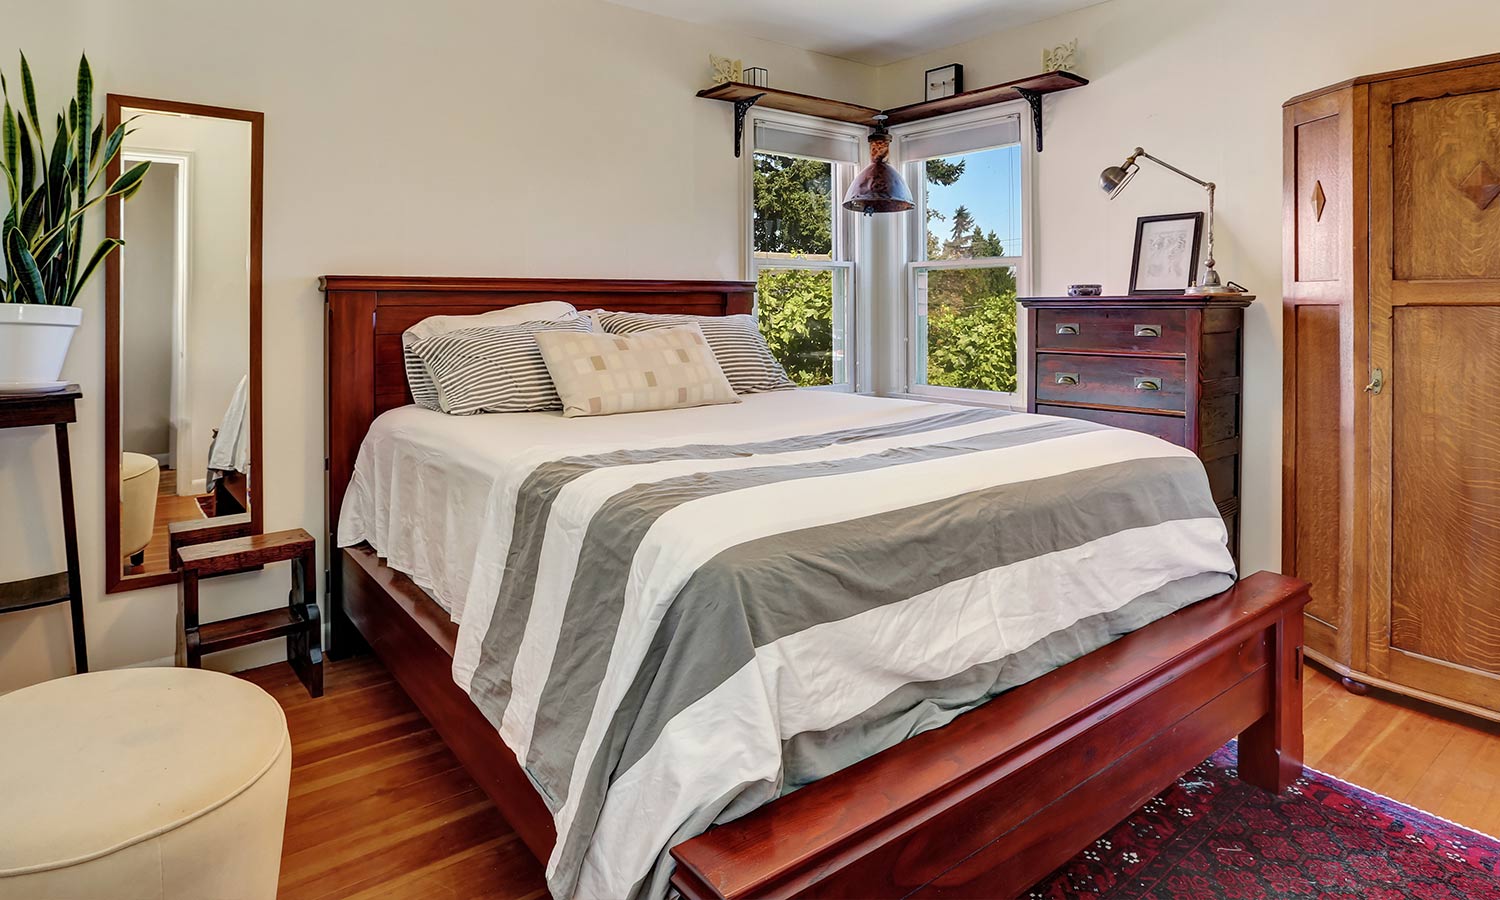 75 Diffe Types Of Beds For Every, Can Any Mattress Fit On An Adjustable Bed Frame